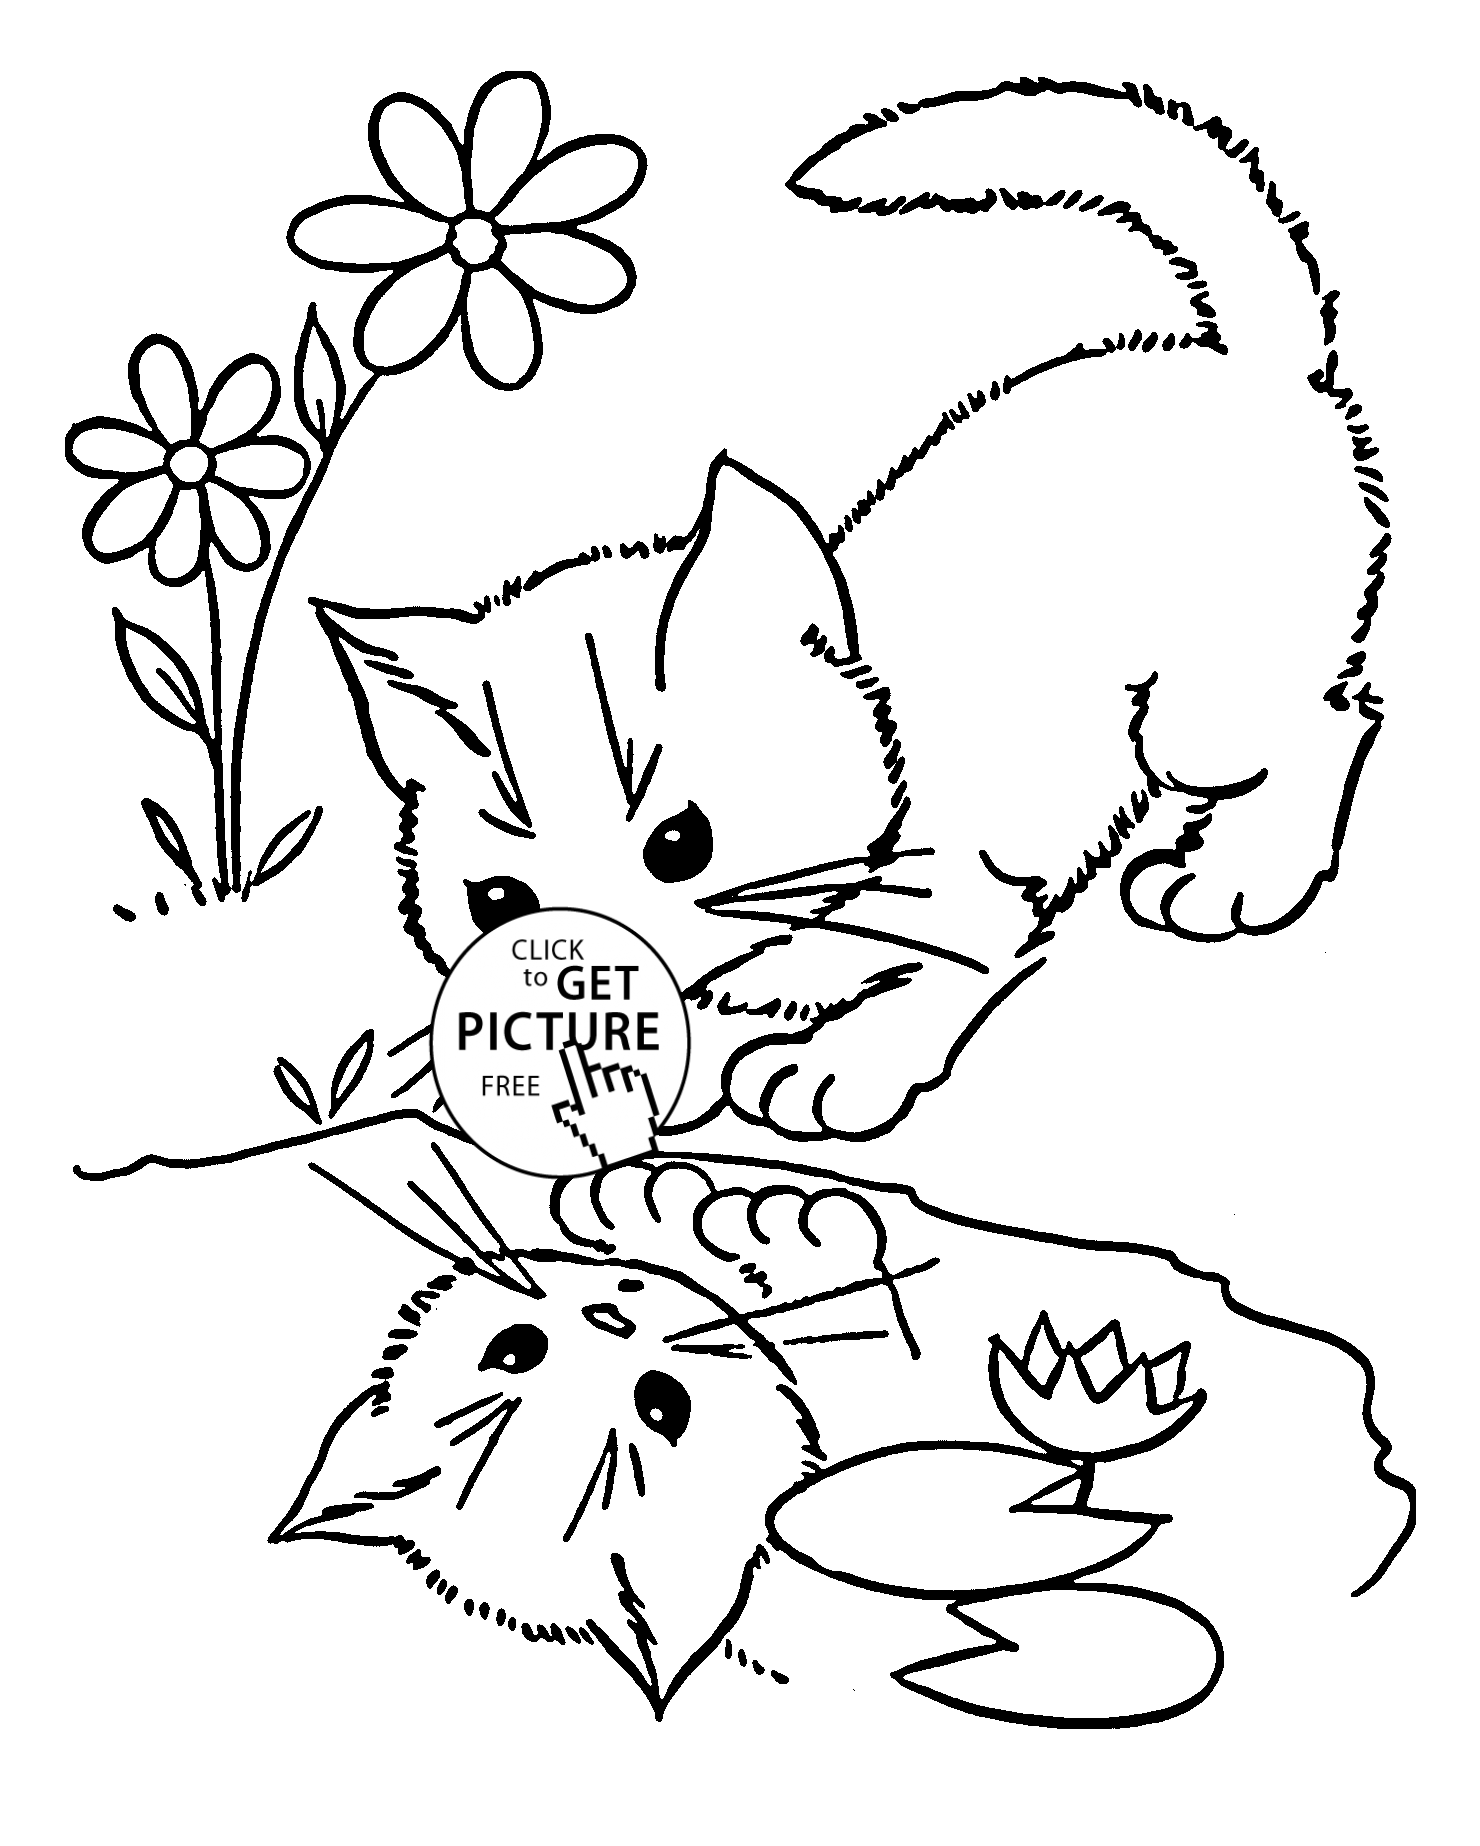 Cute Little Kittens Coloring Pages / Cute Baby Kitten Coloring Pages